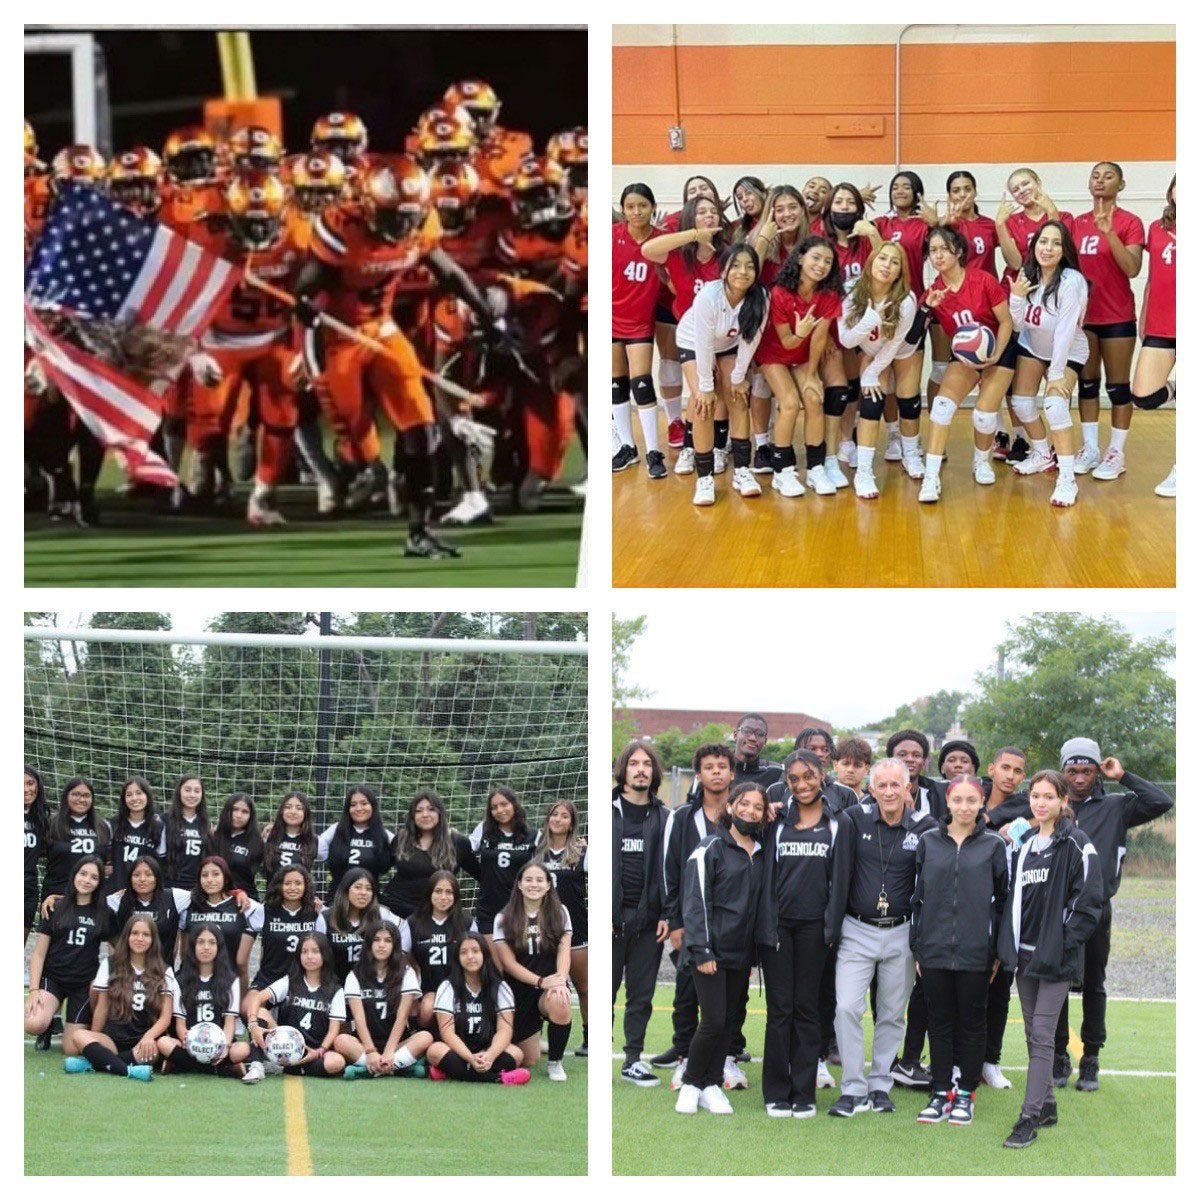 High School Teams Left to Right: Weequahic Football, East Side Volleyball, Technology Girls Soccer and Track